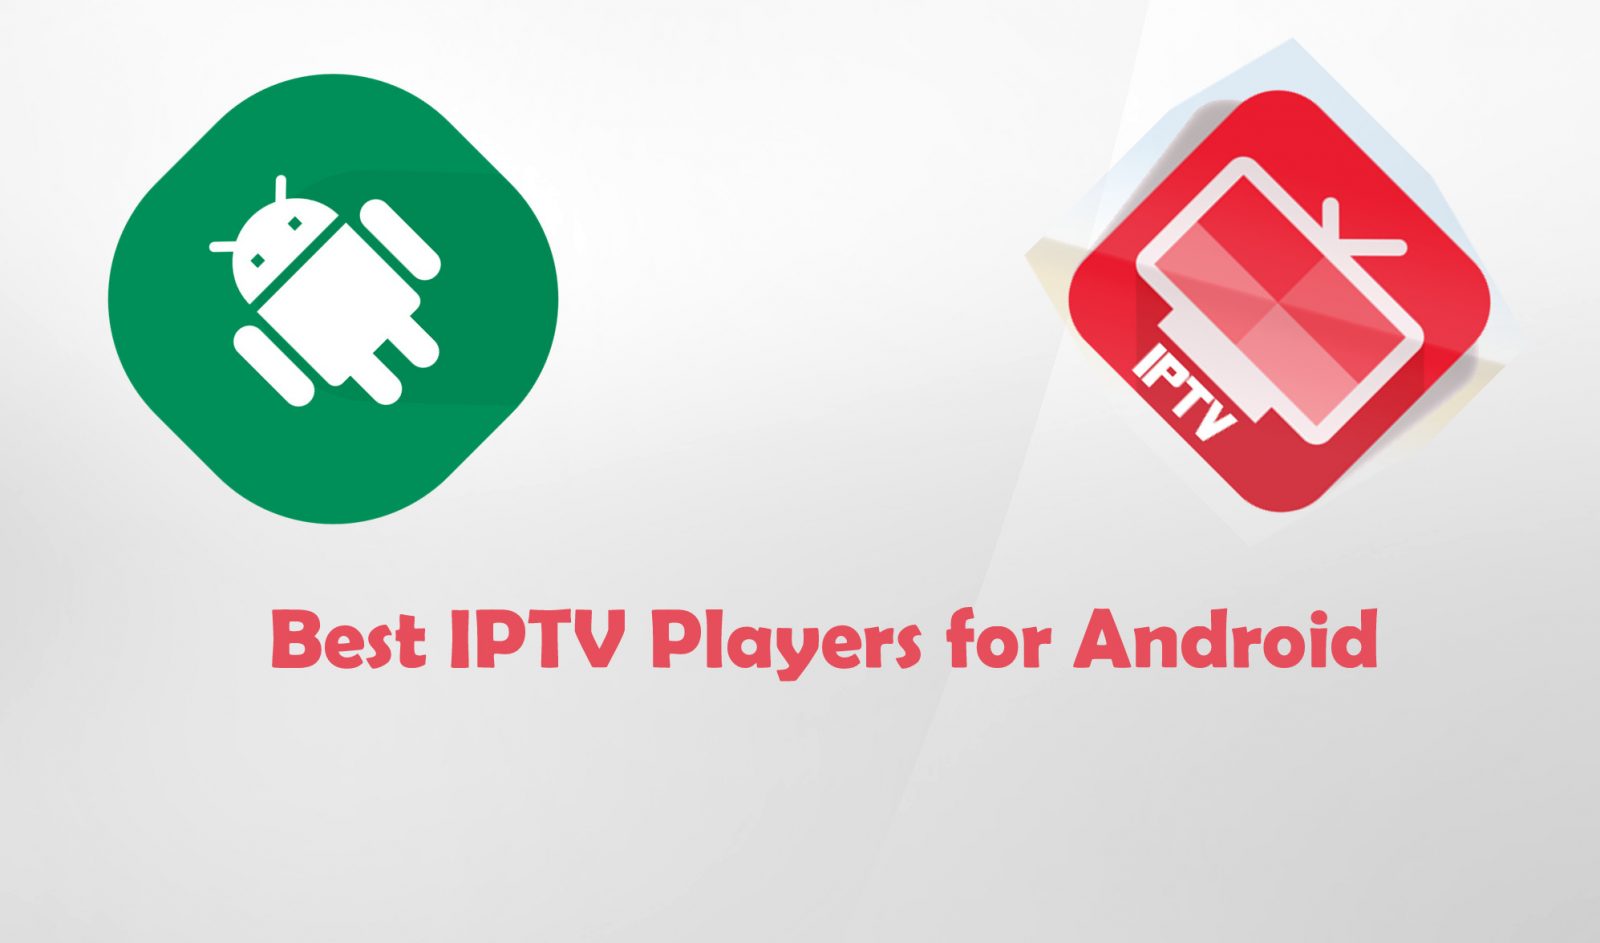 13 Best IPTV Players for Android [2021]